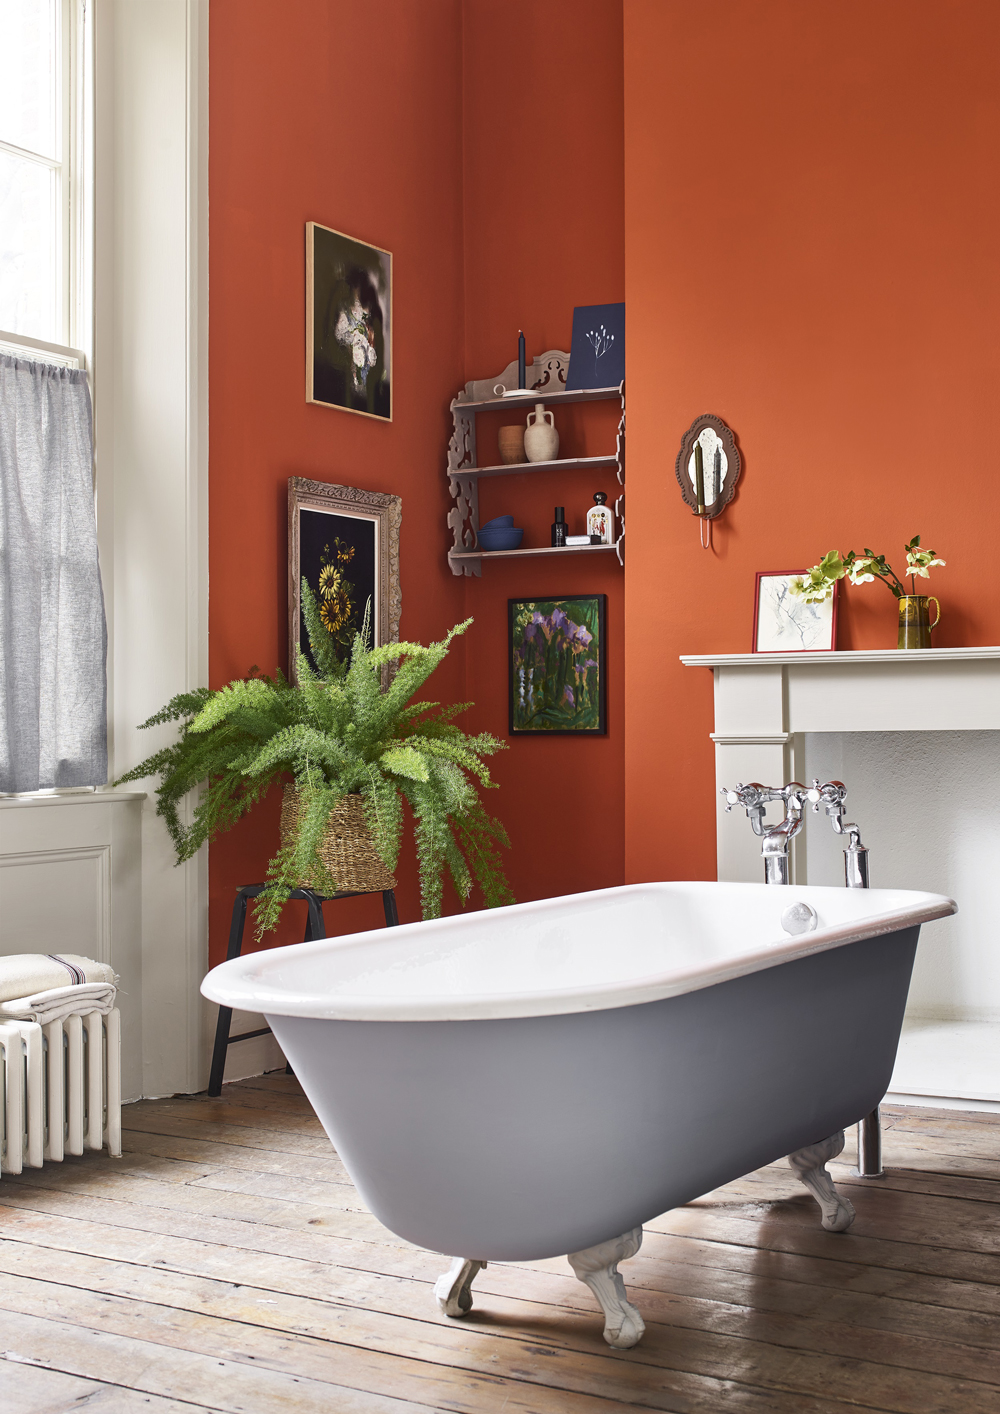 Riad Terracotta Bathroom featuring Freestanding Bathtub in Louis Blue Chalk Paint and Trims in Canvas Satin Paint. Plant, Framed Painting, and Assorted Accessories